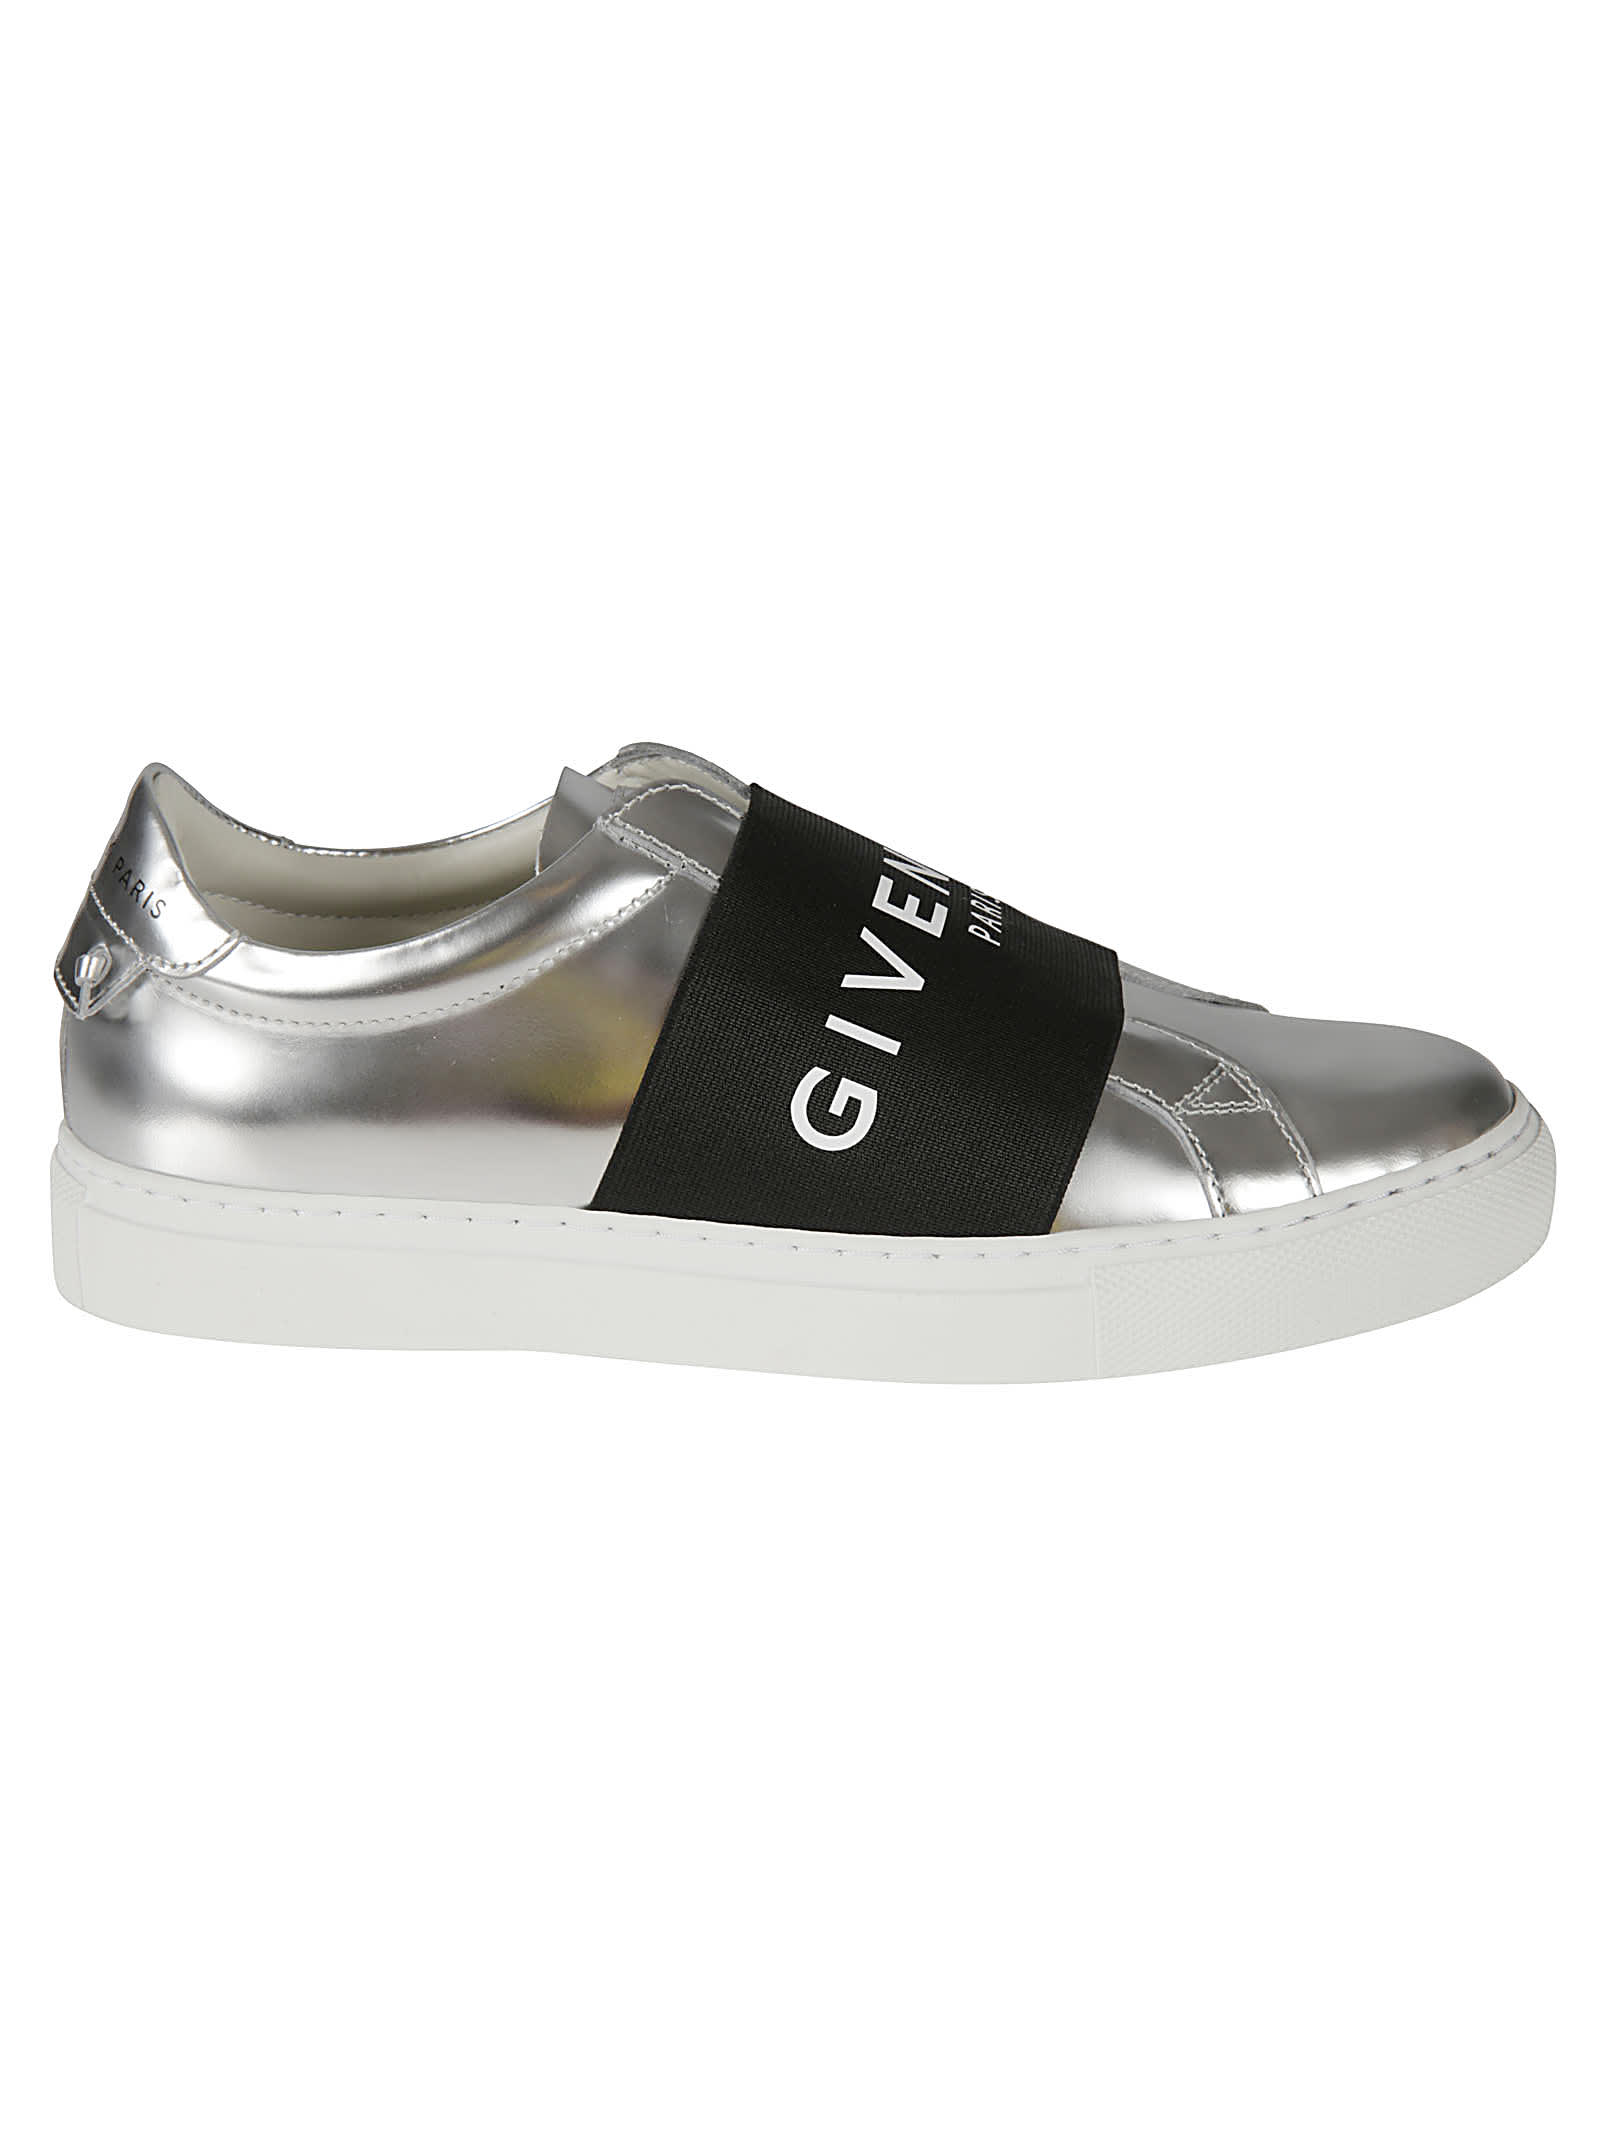 GIVENCHY URBAN STREET trainers,BE0005 E13T040